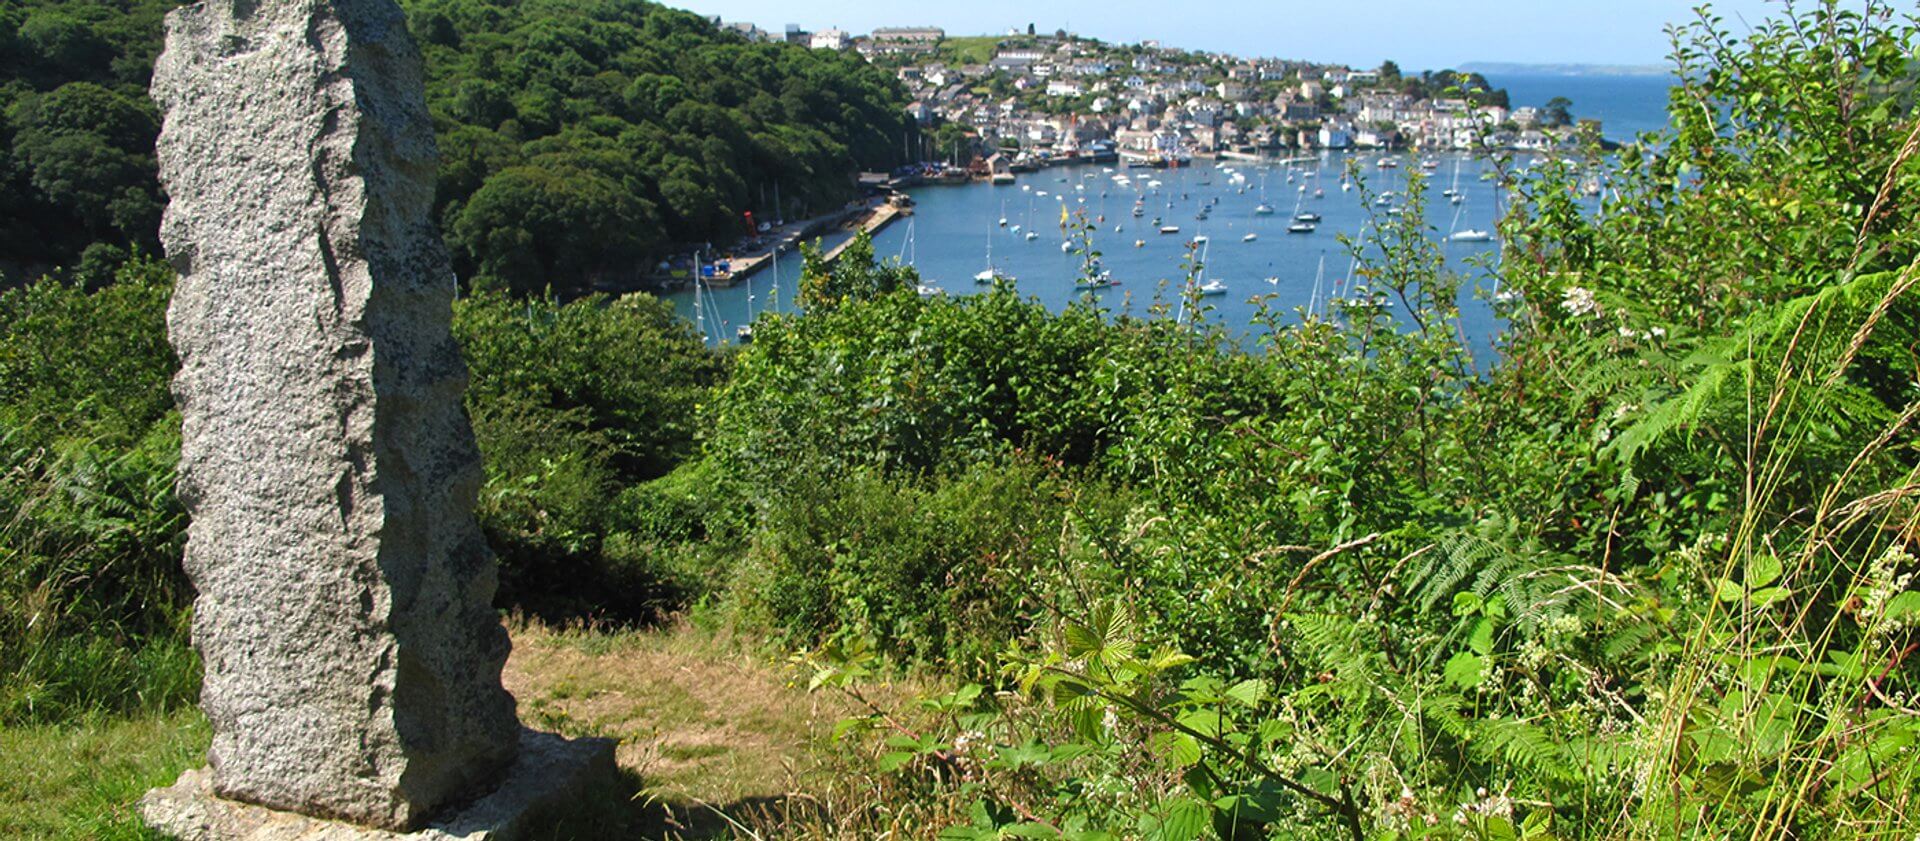 The view of Fowey from the Fowey Hall Walk, with greenery in the forground and a pillar rock with the estuary below full of boats and the houses on the opposite bank.